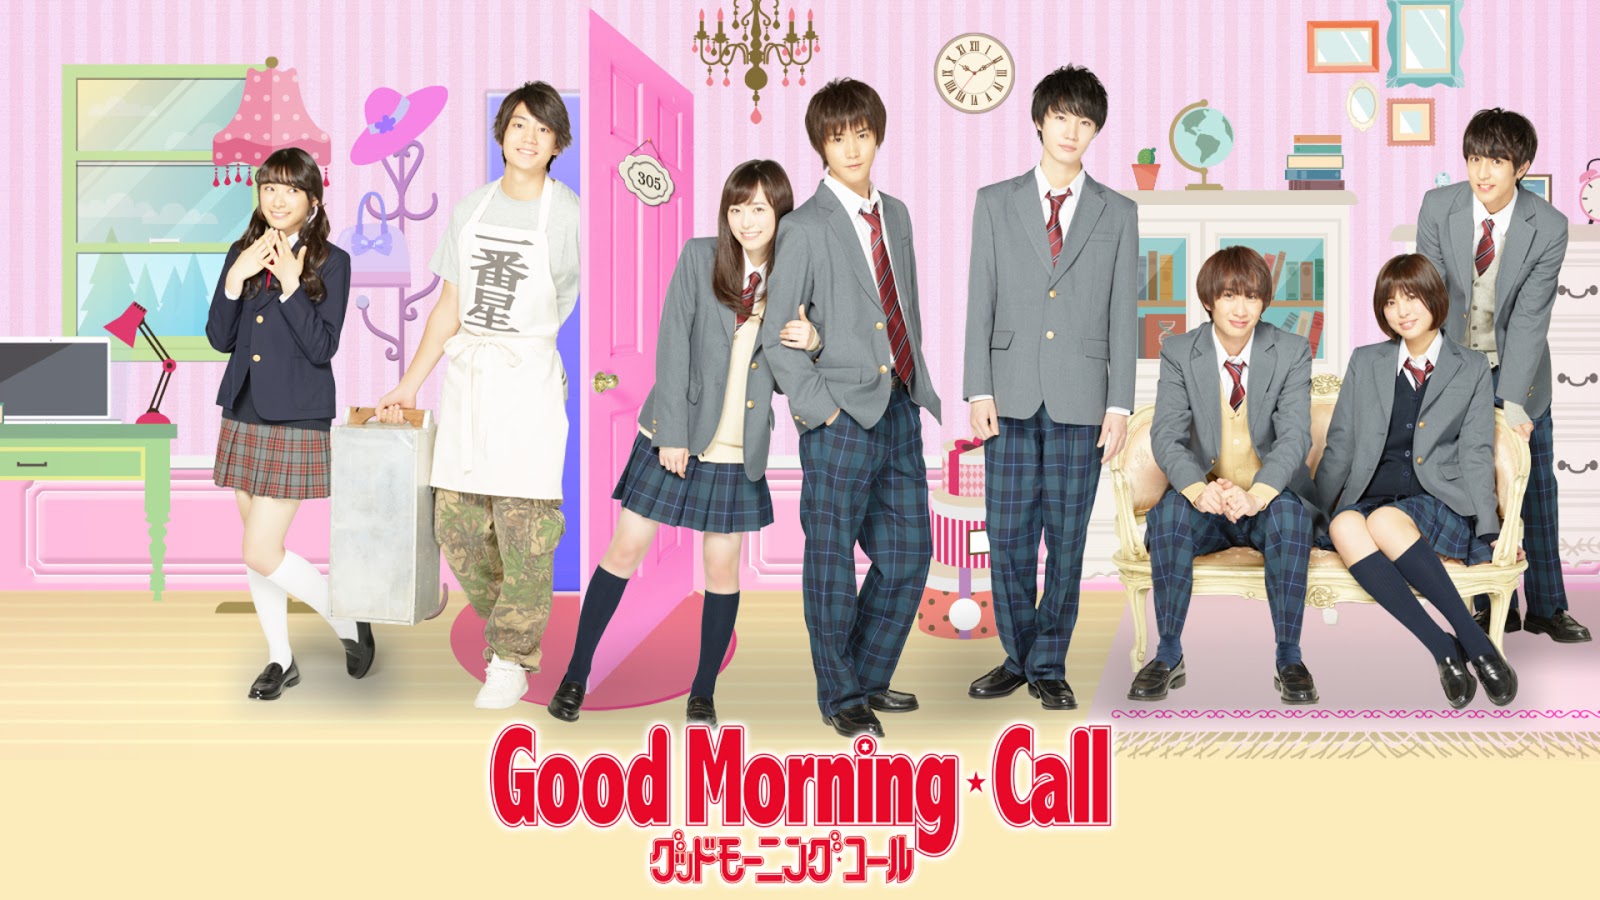 "Good Morning Call" - wide 2